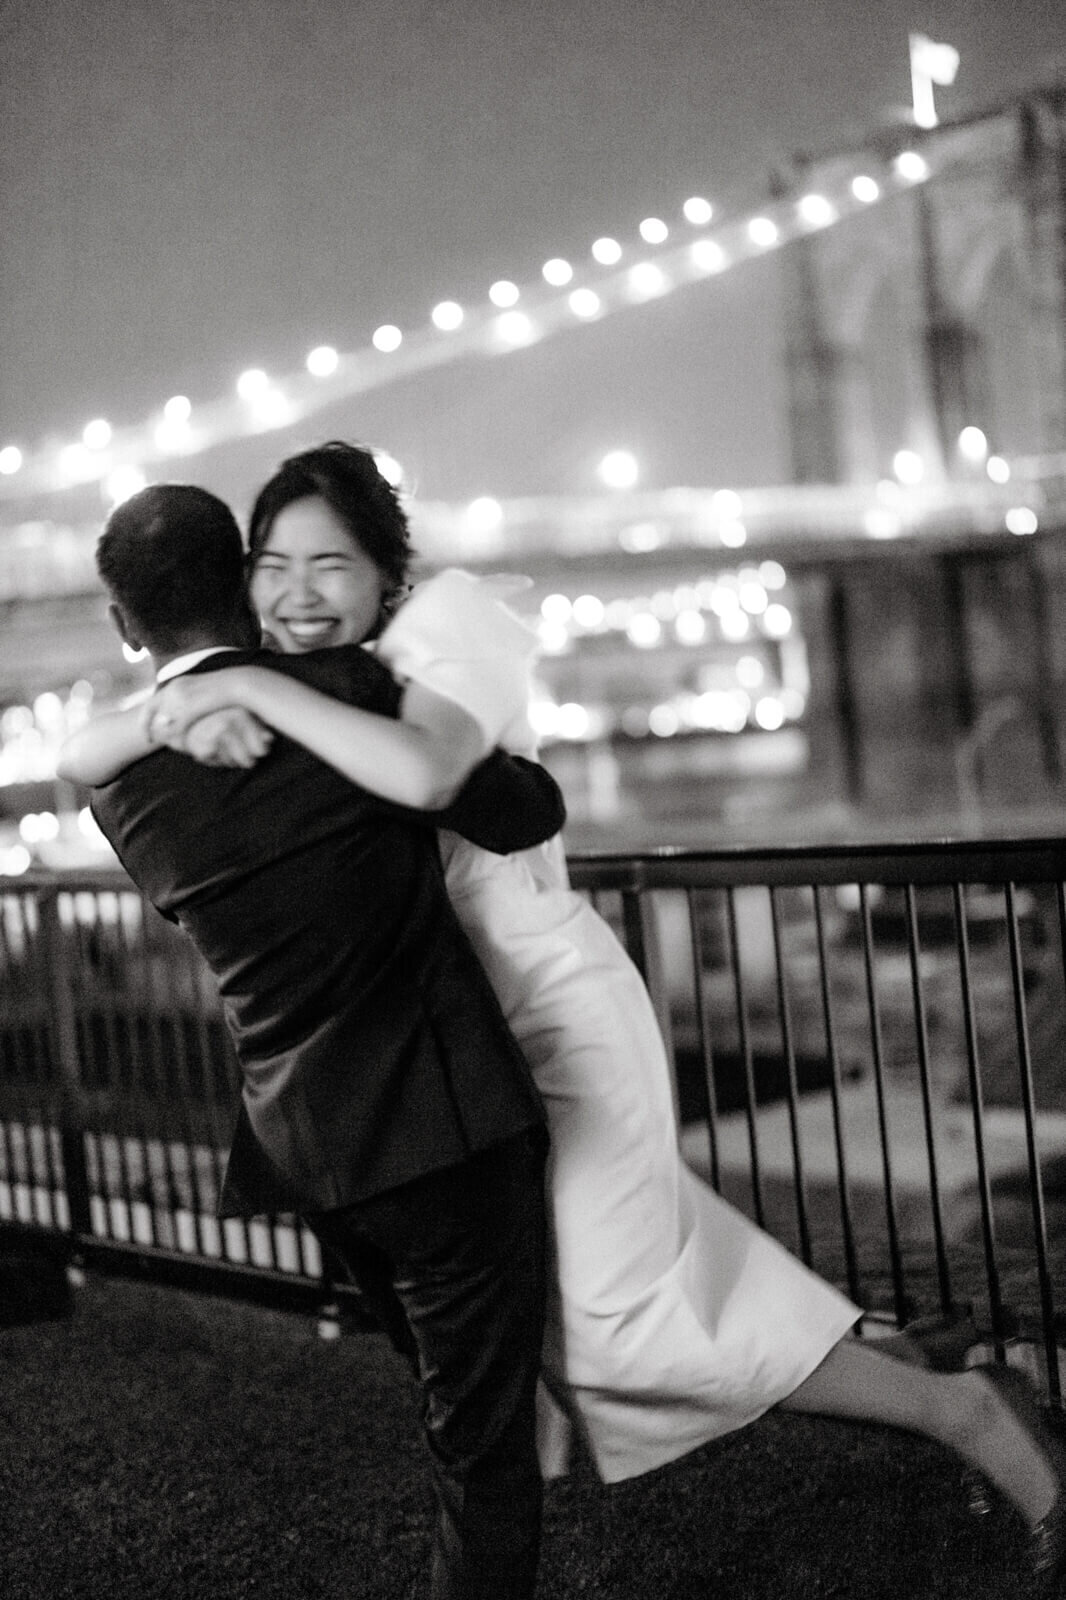 The groom hugging while carrying the bride in the air, on a veranda overlooking the Brooklyn Bridge.